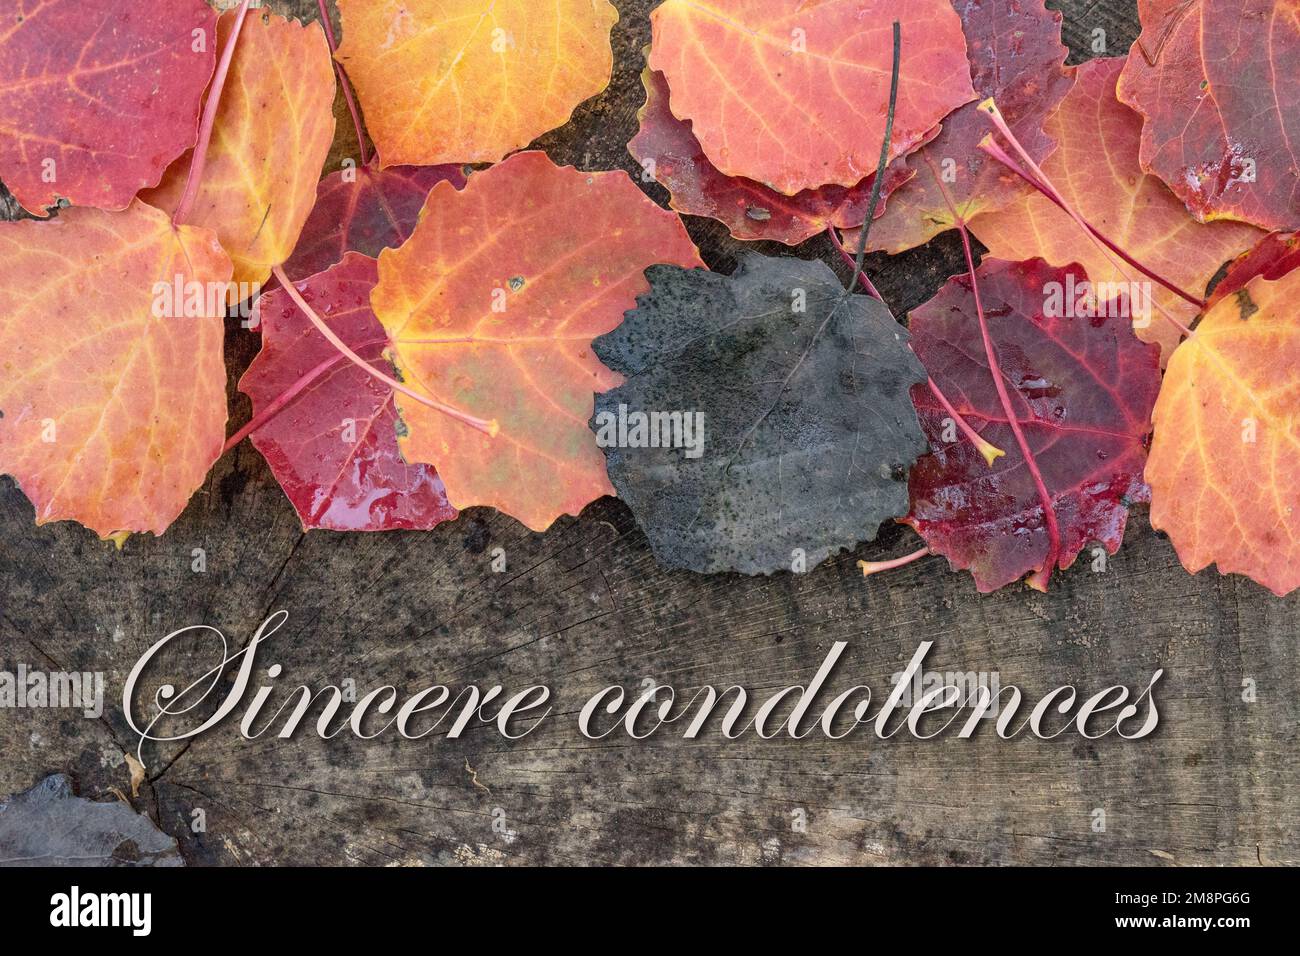 Mourning card with autumn leaves and english text: Sincere condolences Stock Photo